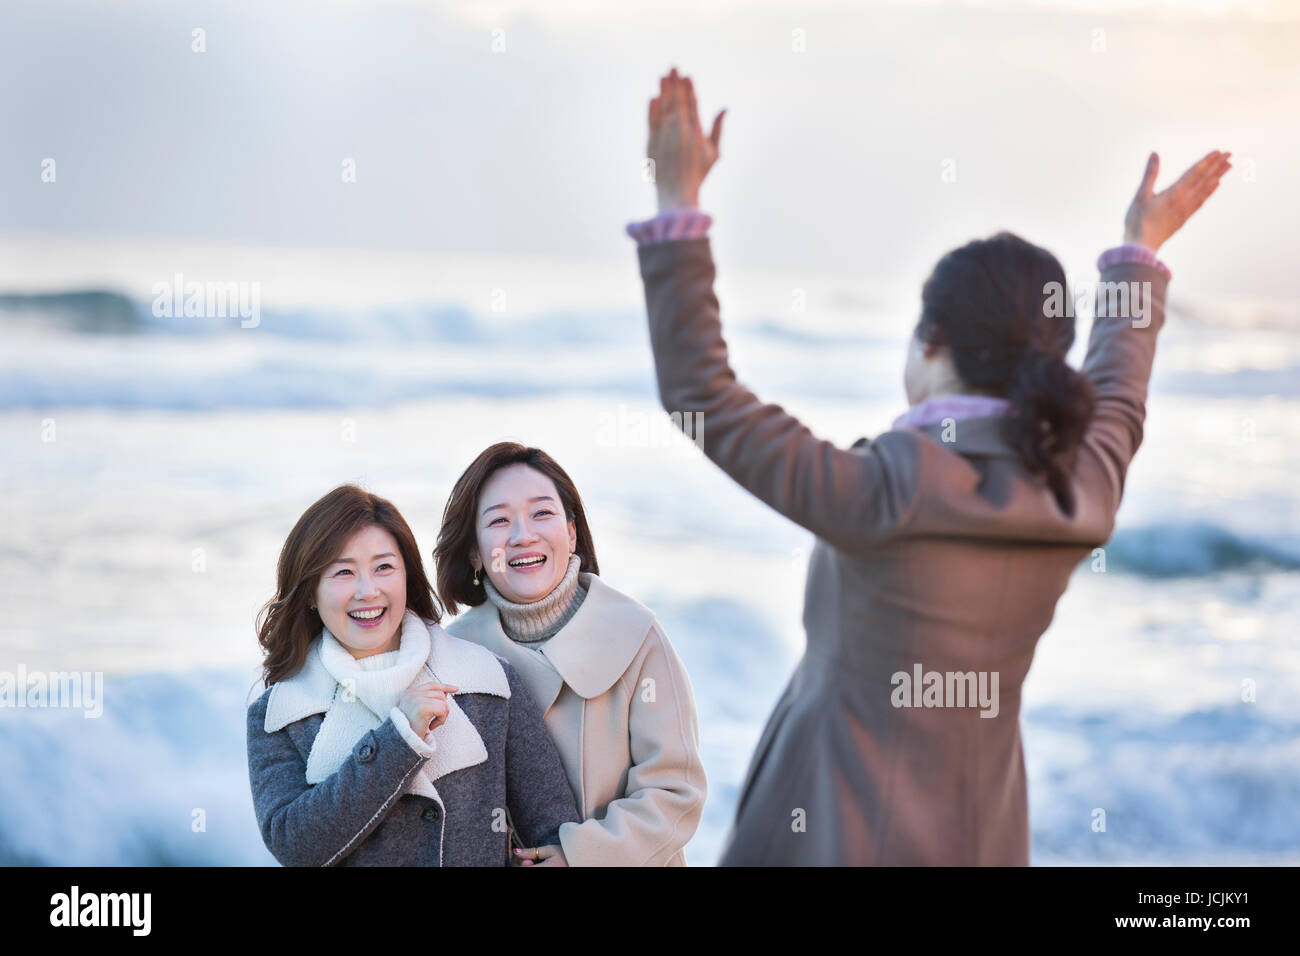 Three smiling middle aged women on beach Stock Photo